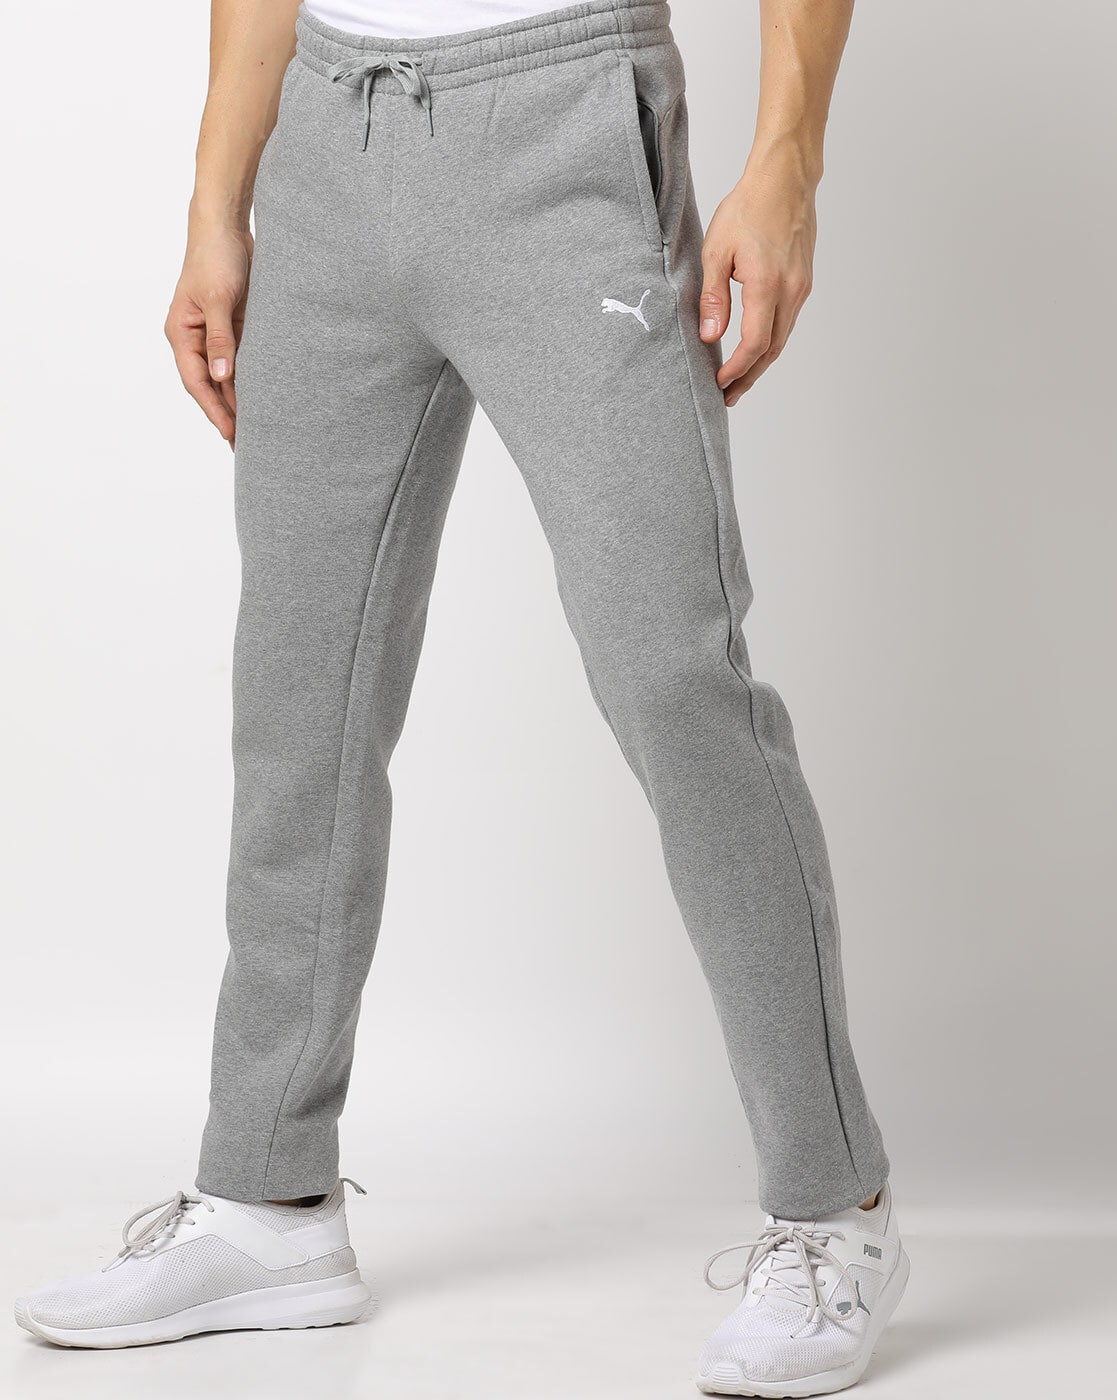 puma Authentic Joggers ( SOLD OUT 💰) Colour : Grey Size : 32-36 Length 40  Price 750₹+ Shipping Condition: 9/10 DM TO BUY! #uni… | Instagram